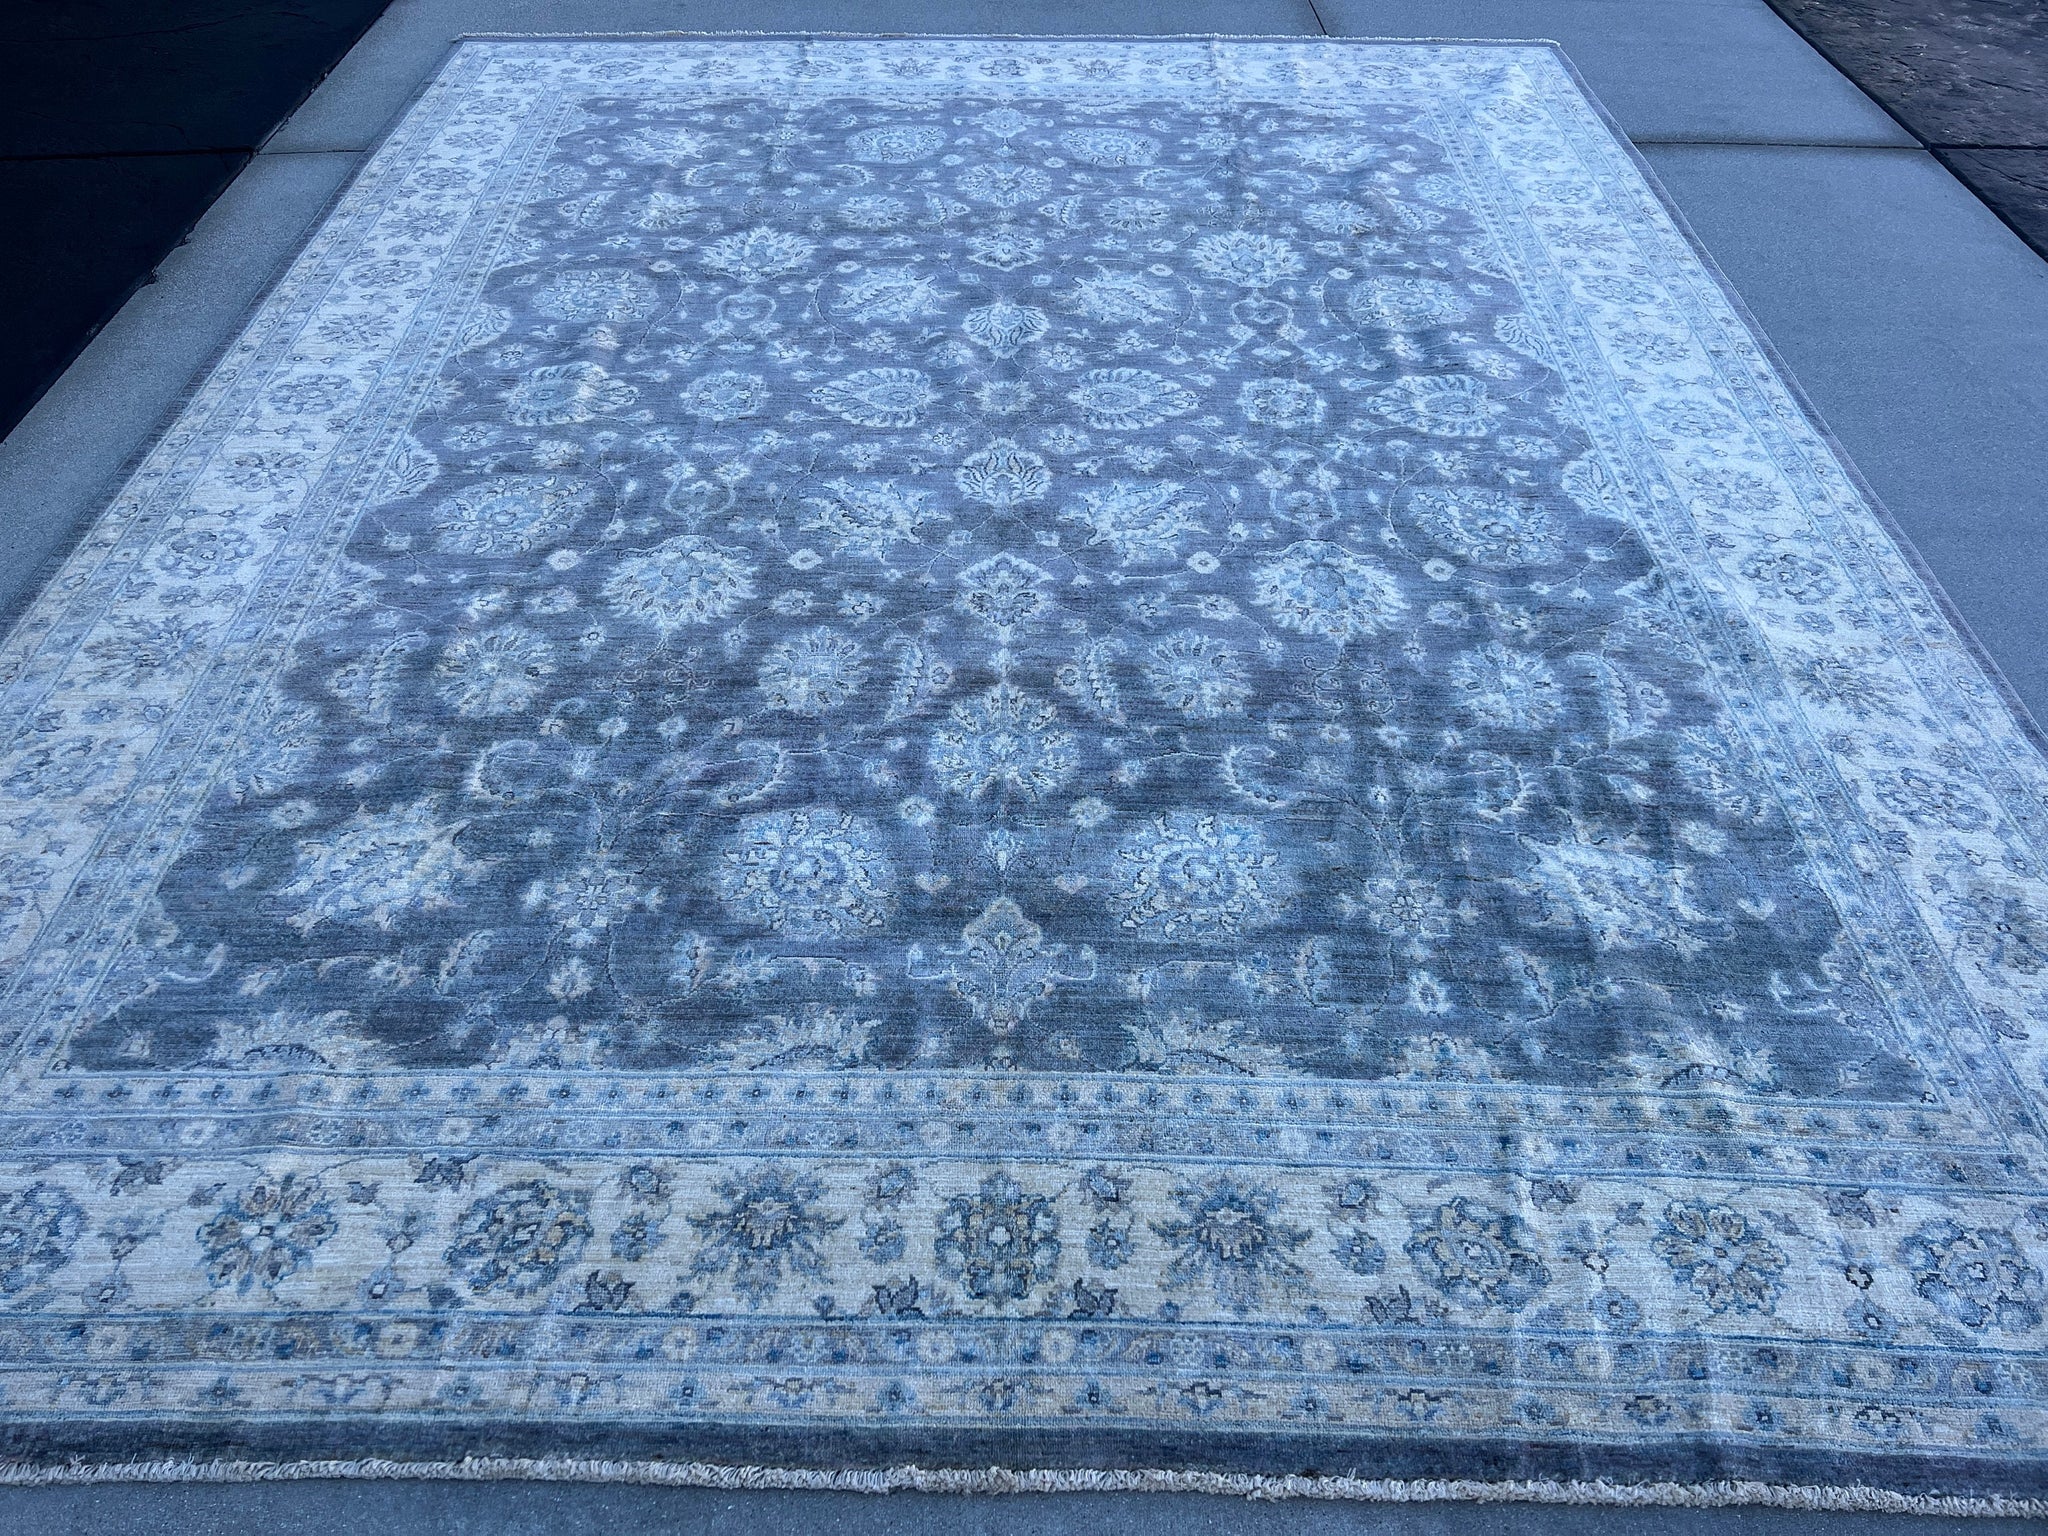 9x12 (270x365) Fair Trade Handmade Afghan Rug | Muted Charcoal Grey Ivory Light Blue Beige Tan | Neutral Hand Knotted Oriental Turkish Wool